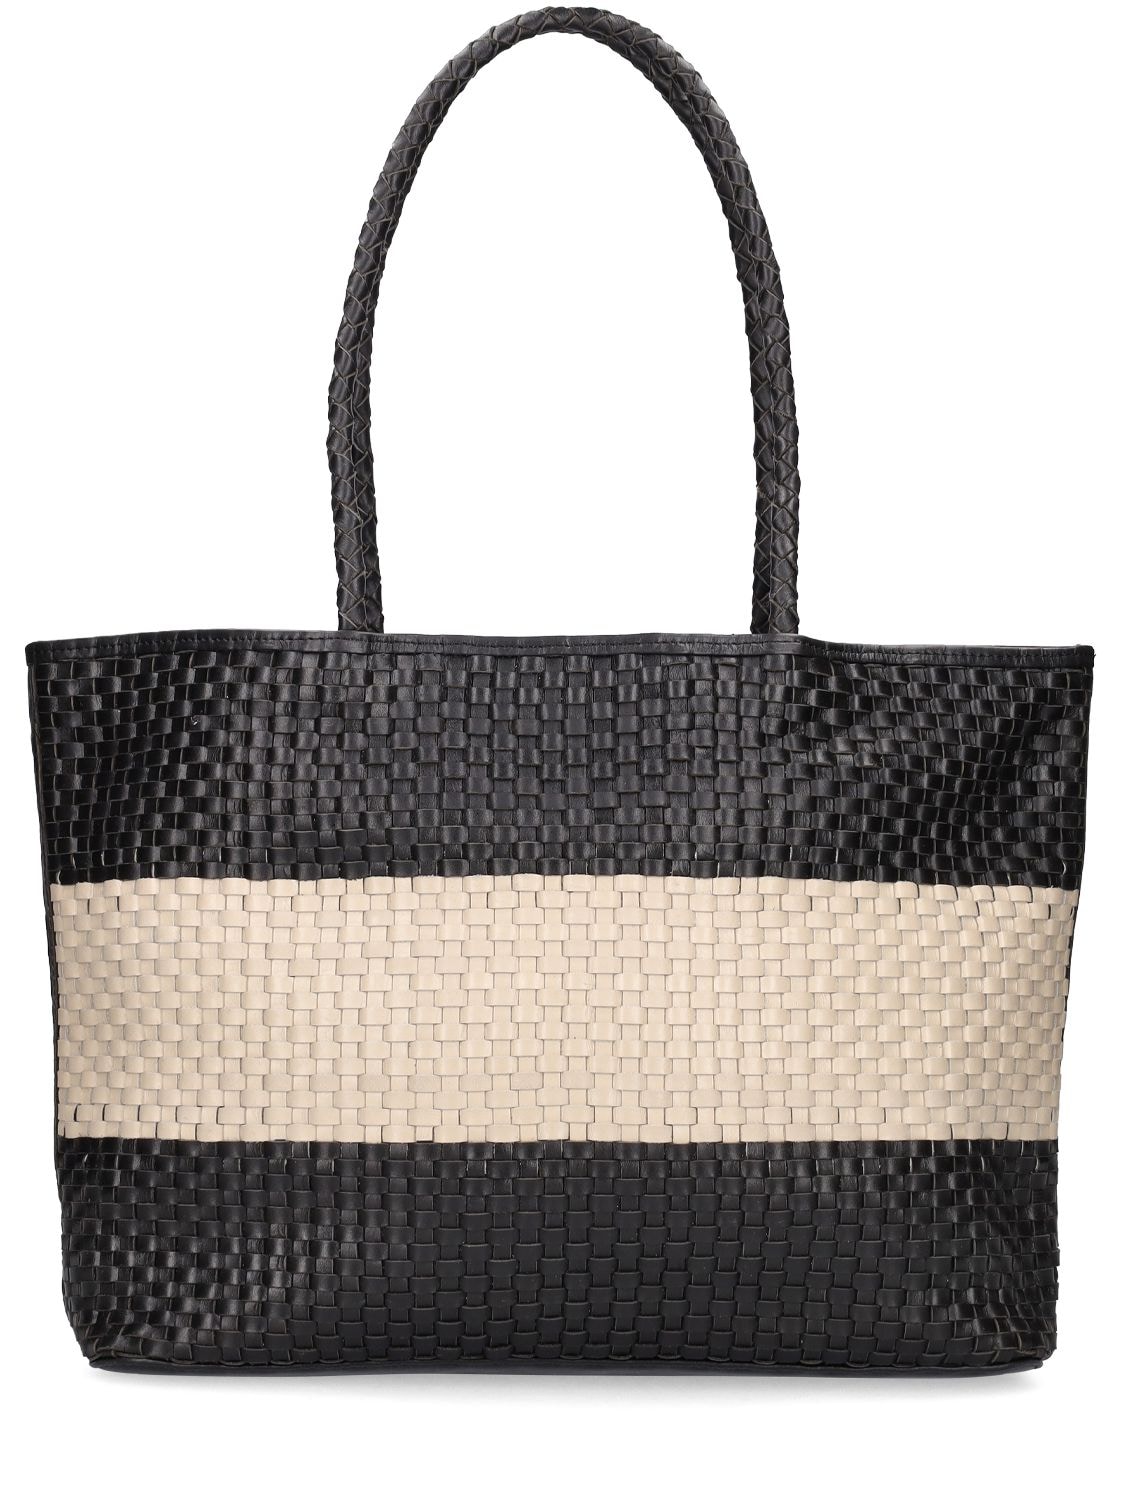 BEMBIEN Lucie Leather Tote Bag